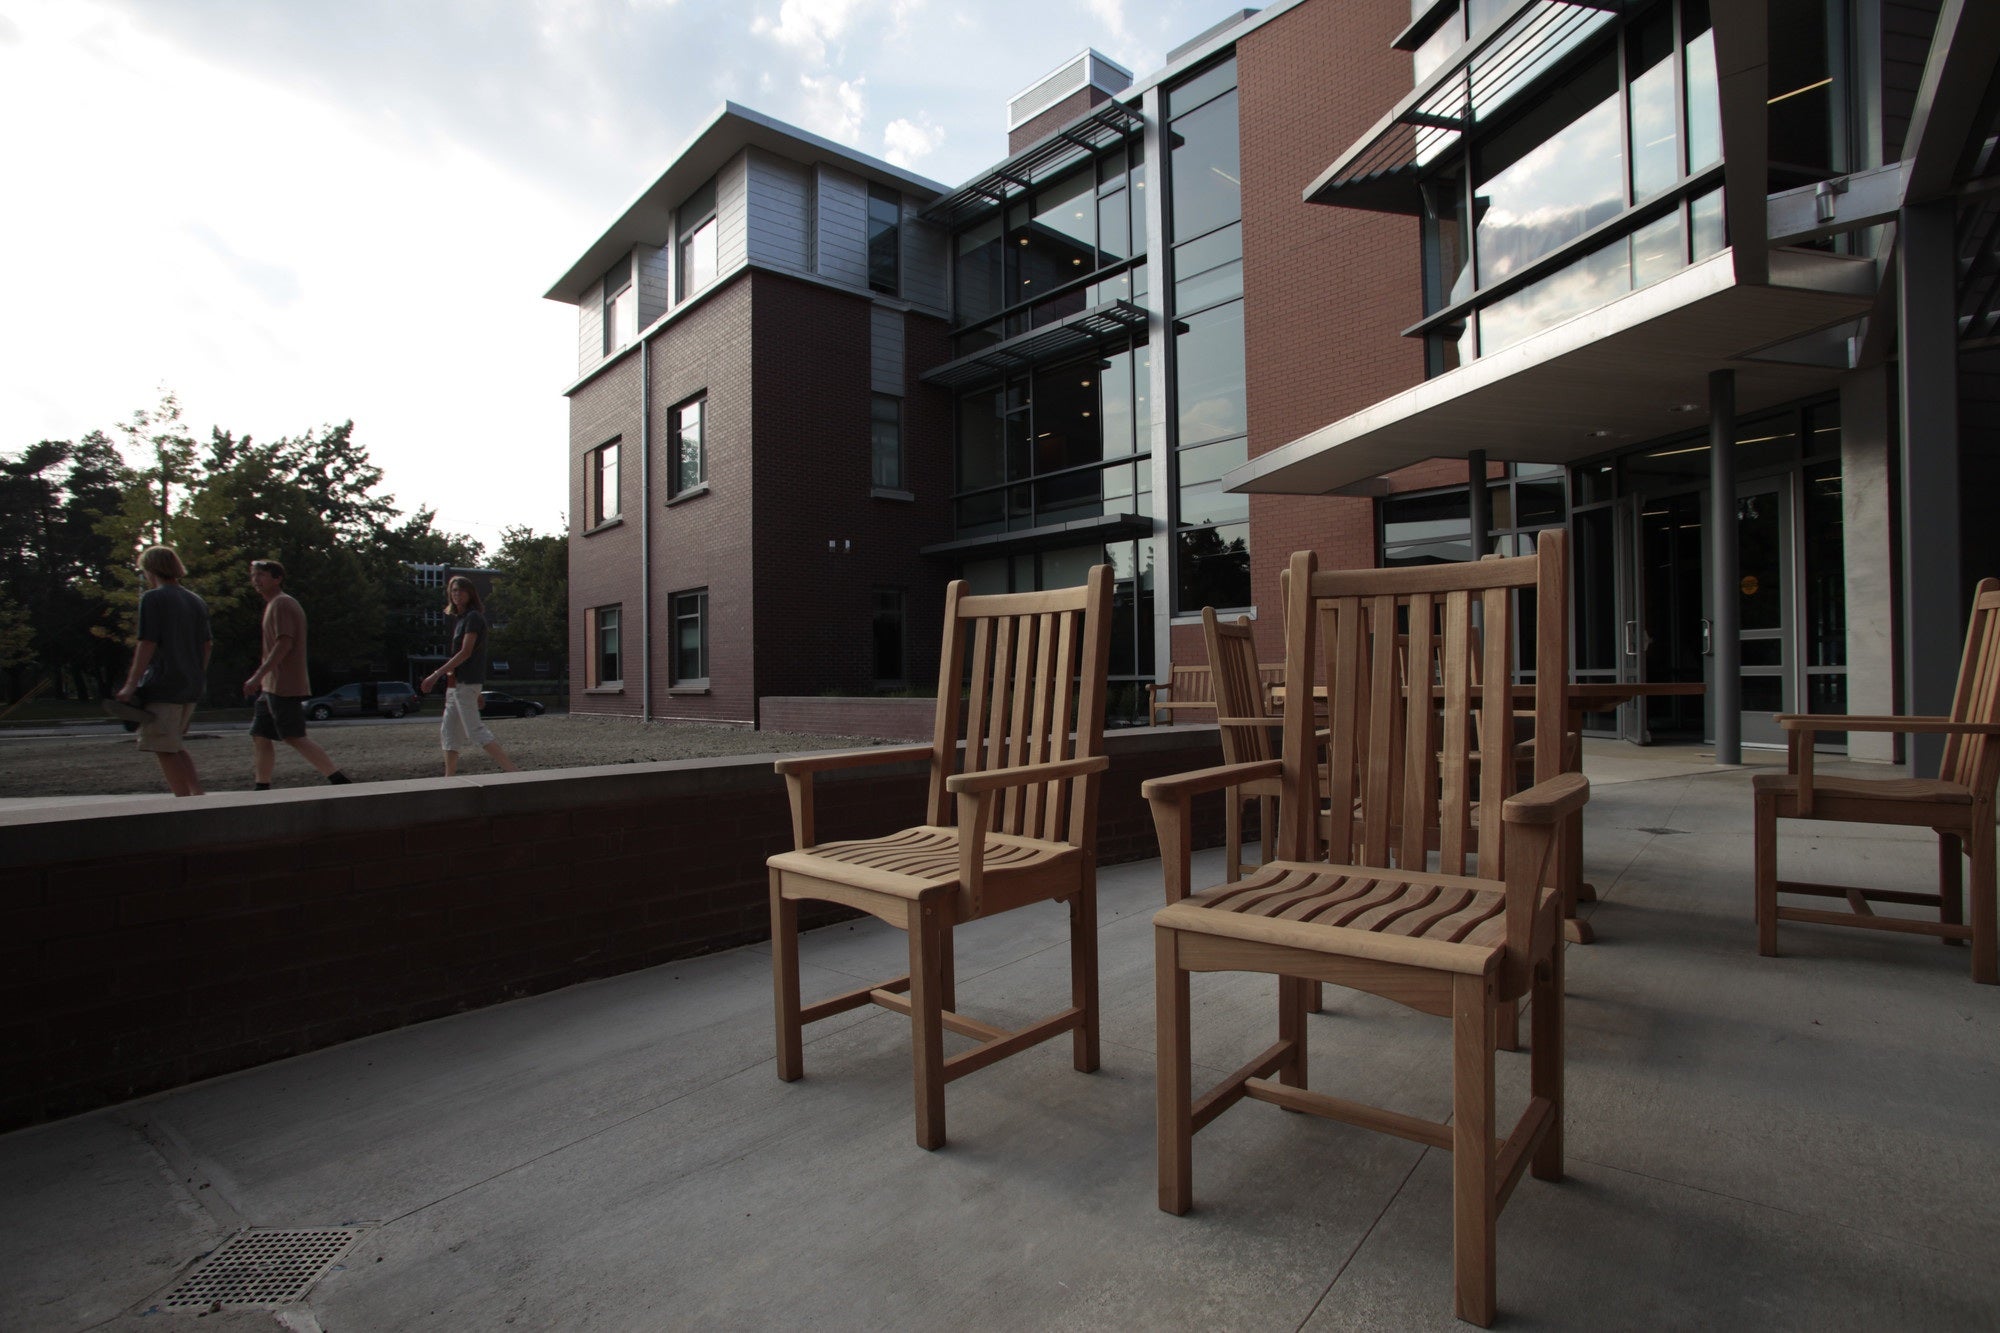 Wood chairs on a concrete patio outside a brick and glass building.